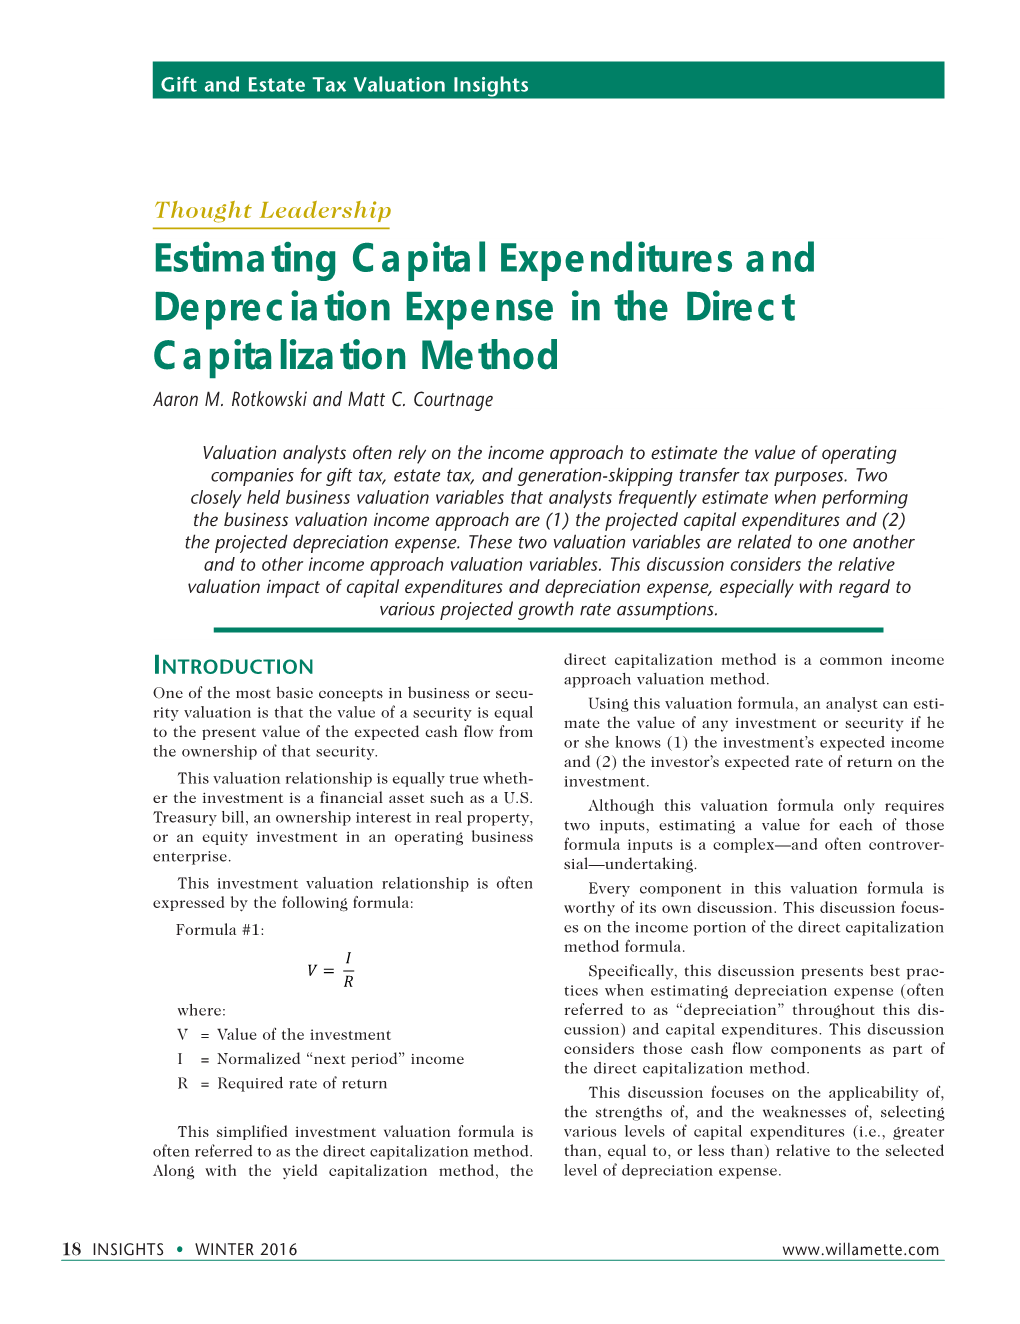 Estimating Capital Expenditures and Depreciation Expense in the Direct Capitalization Method Aaron M